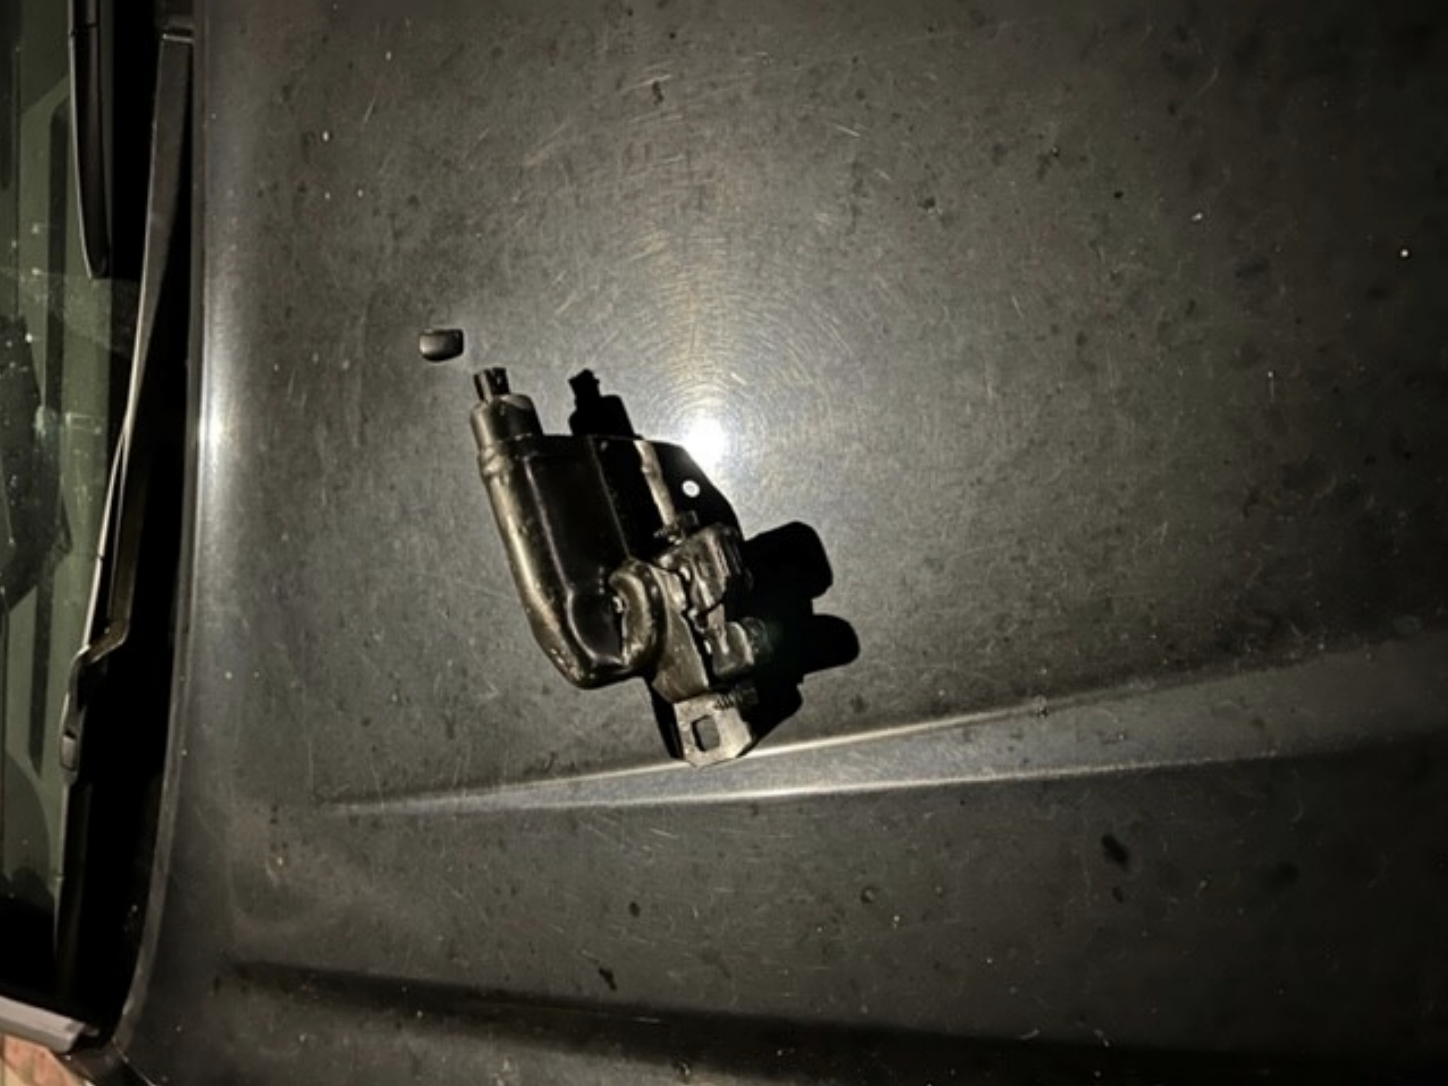 The actuator in question. Source: LAPD